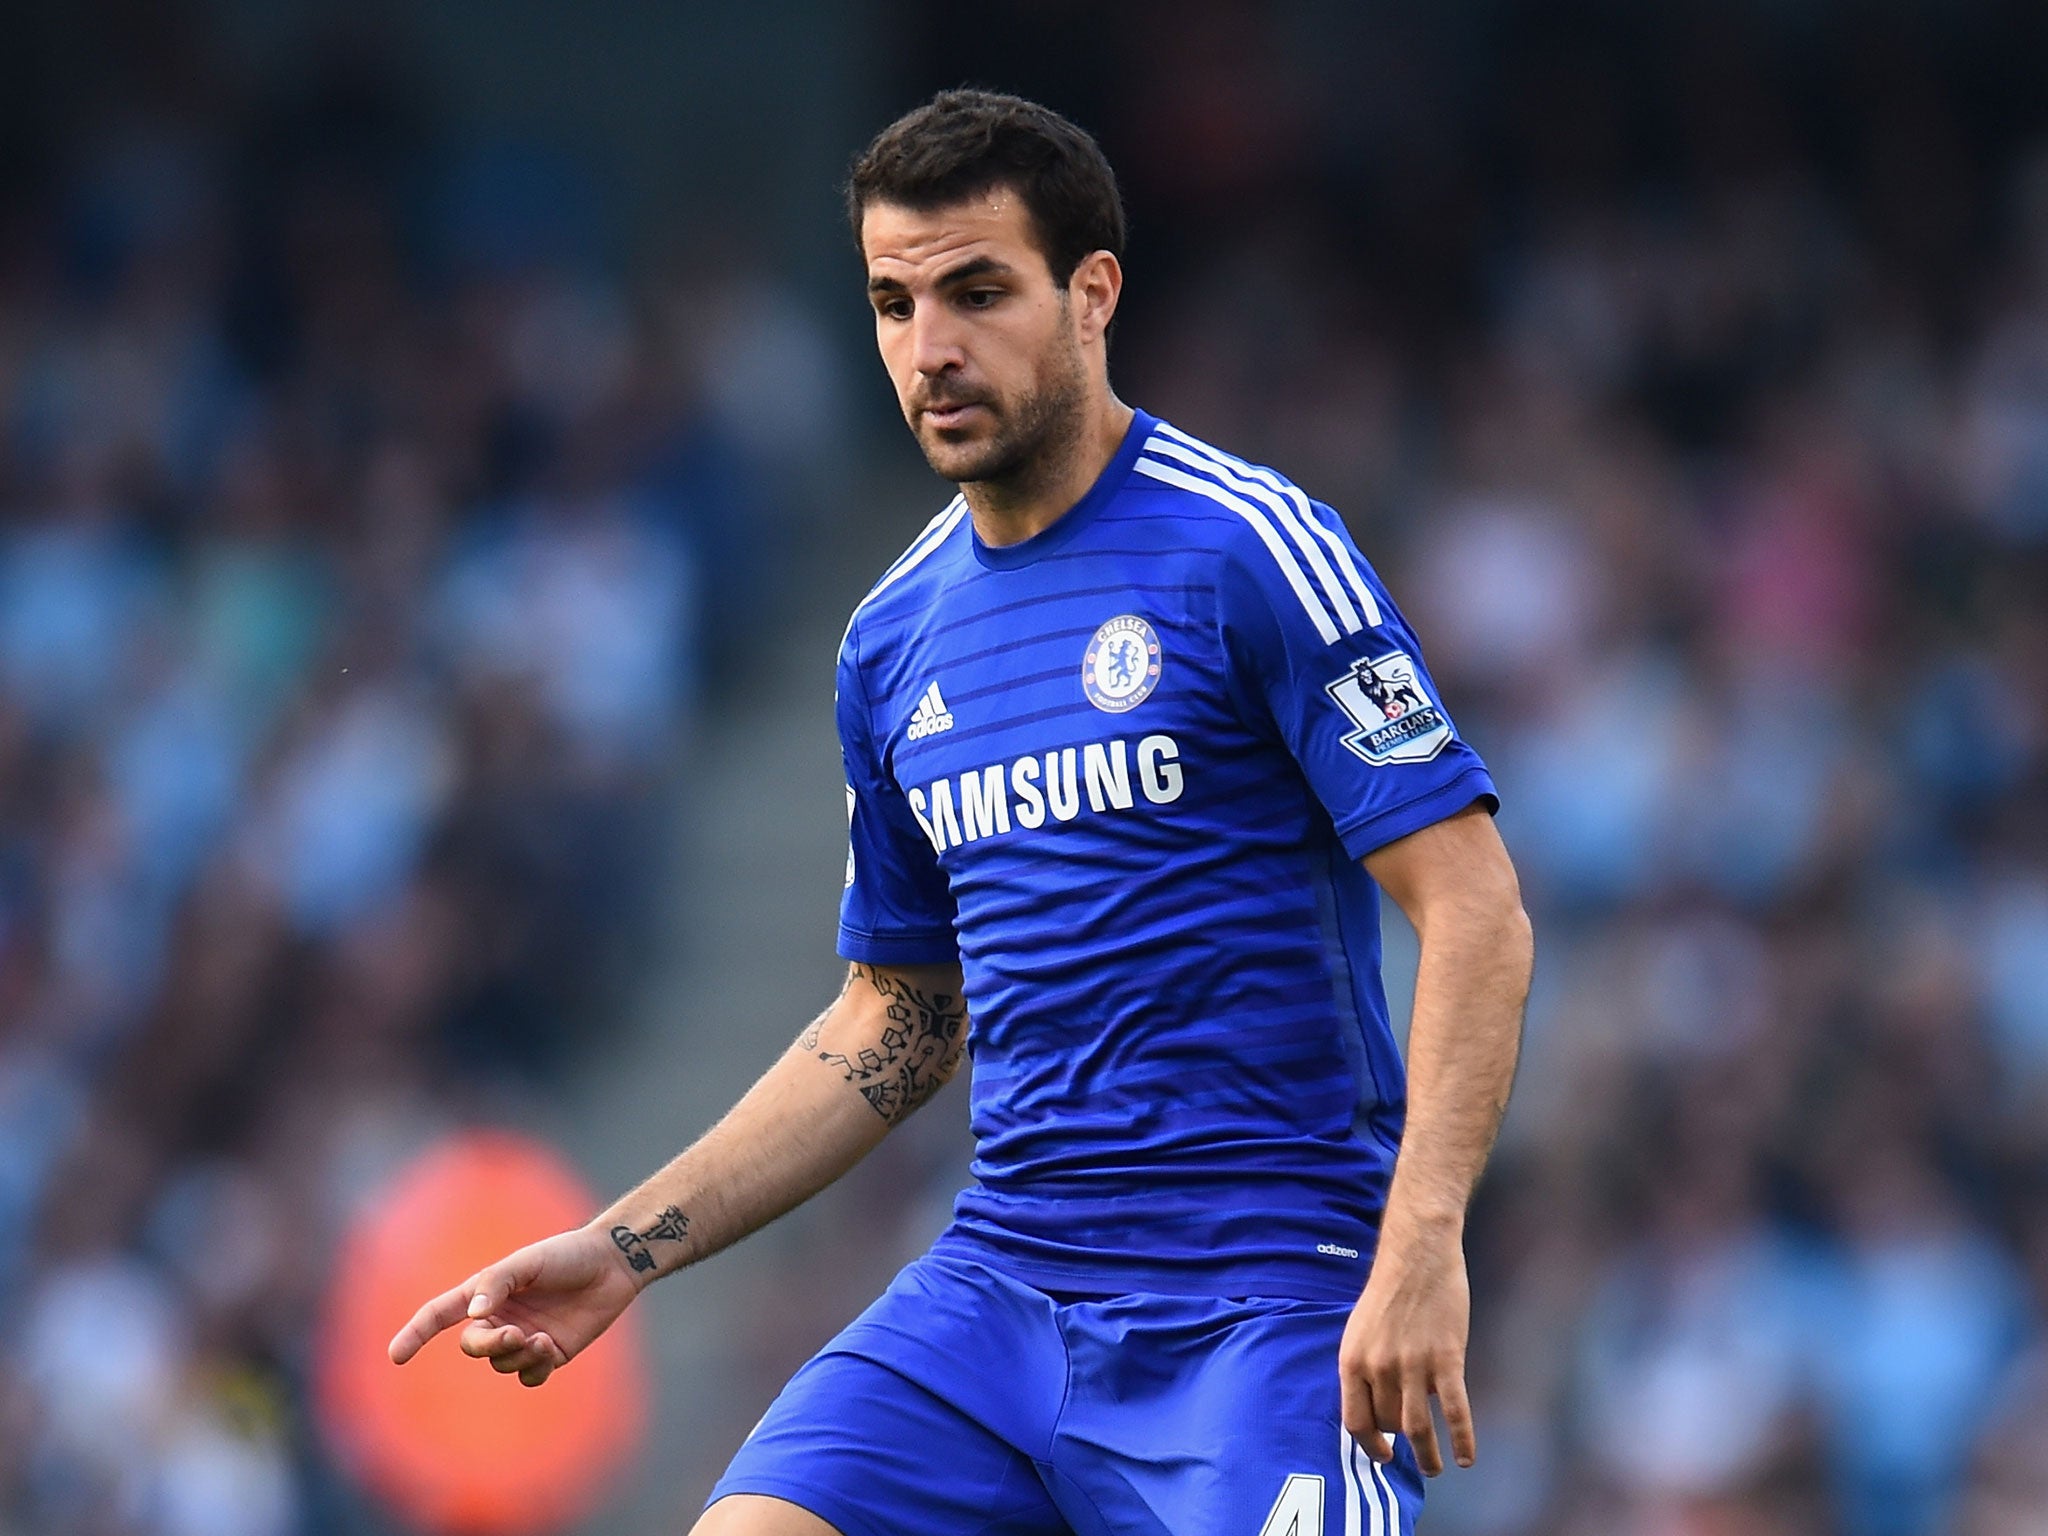  Cesc Fabregas playing for Chelsea, not Arsenal, during a match at the Etihad Stadium.